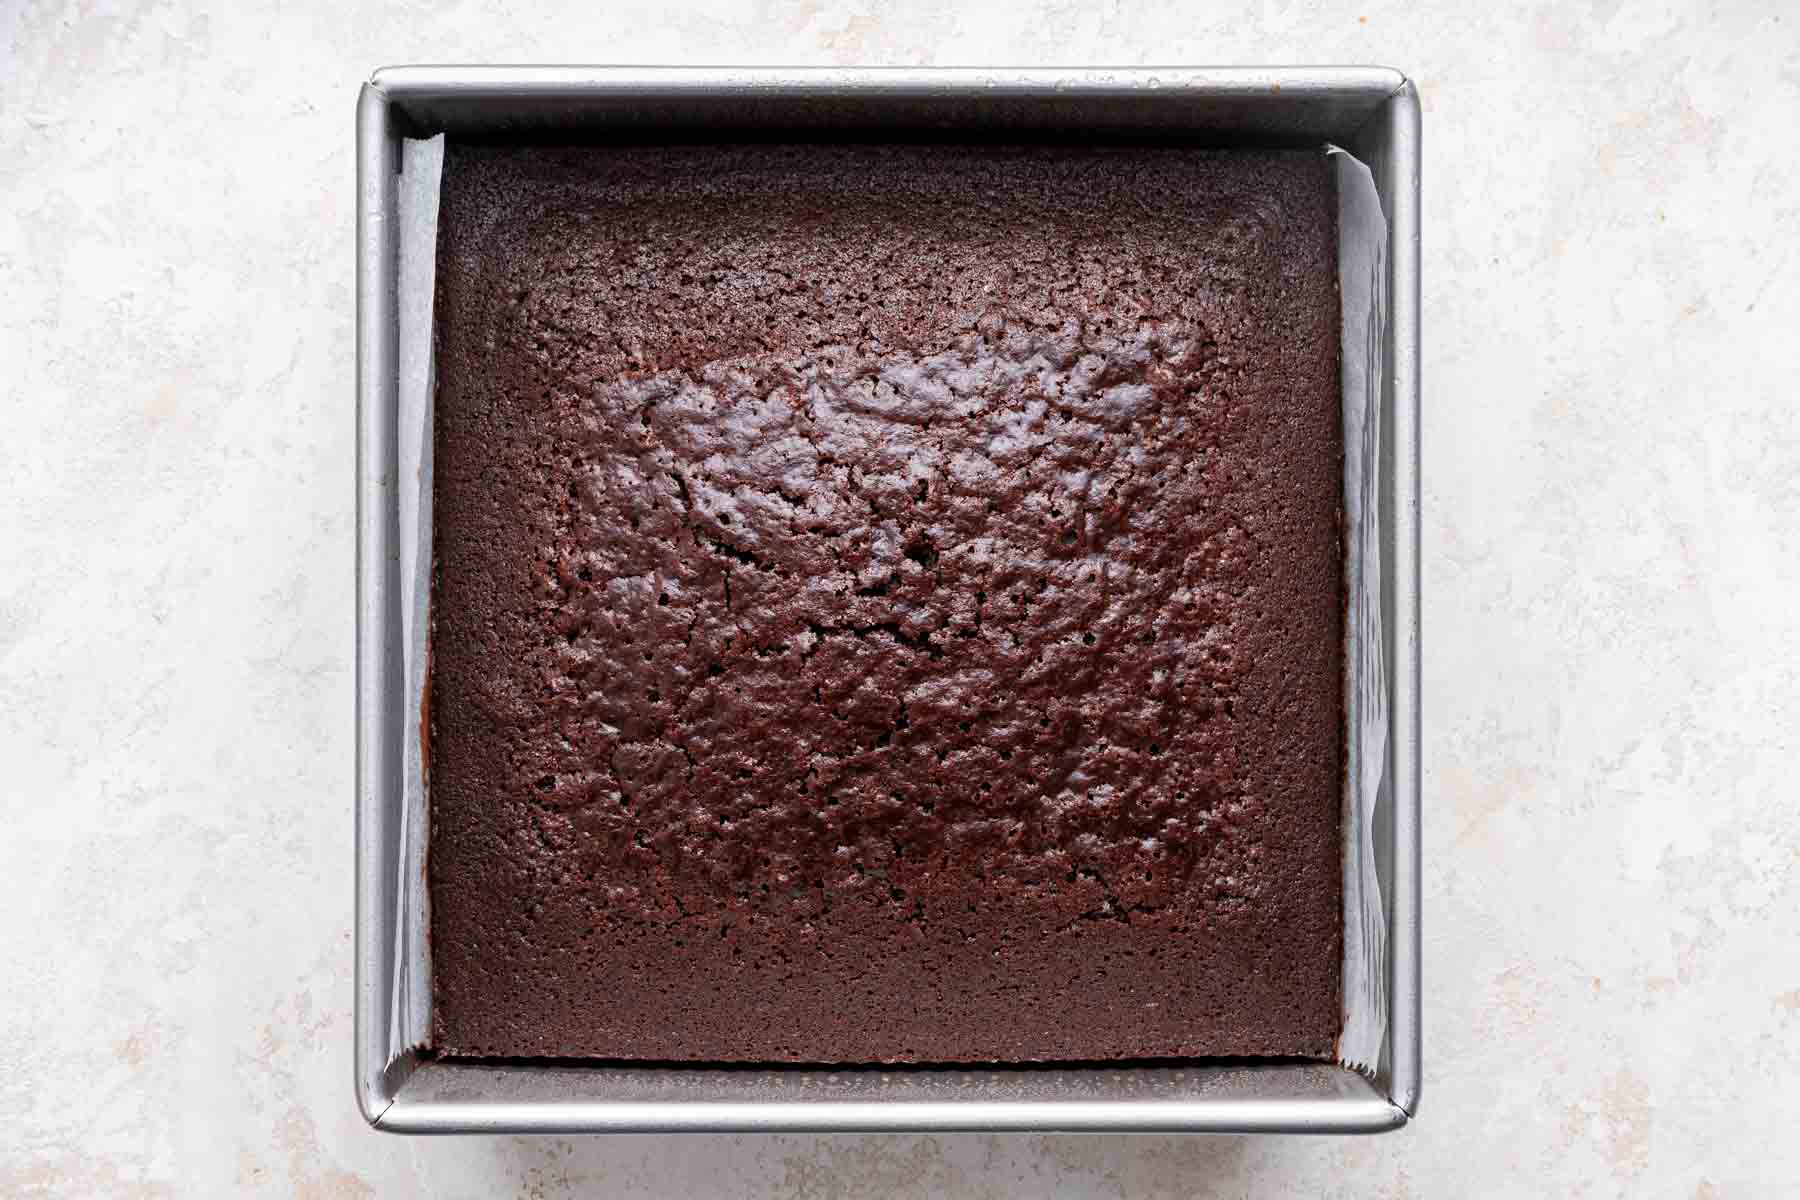 Freshly baked chocolate cake in a square pan.